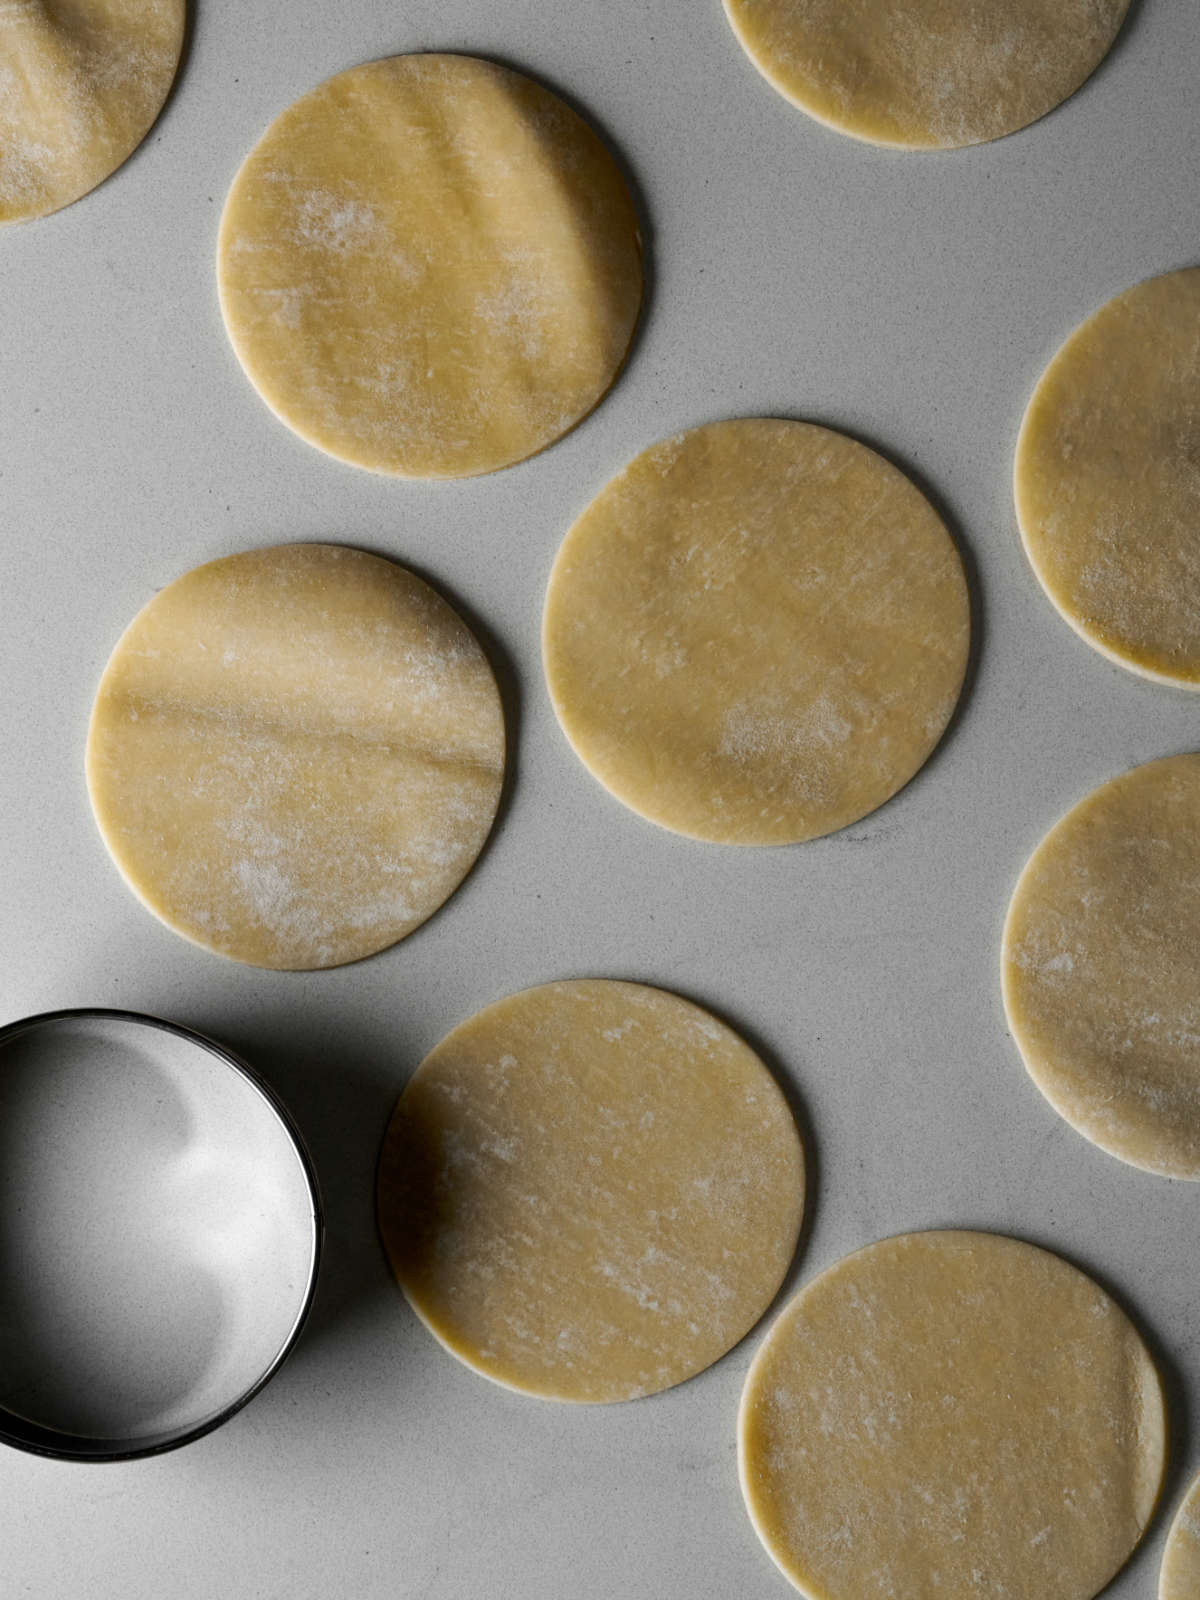 Circles of pie dough on a countertop next to a cookie cutter.